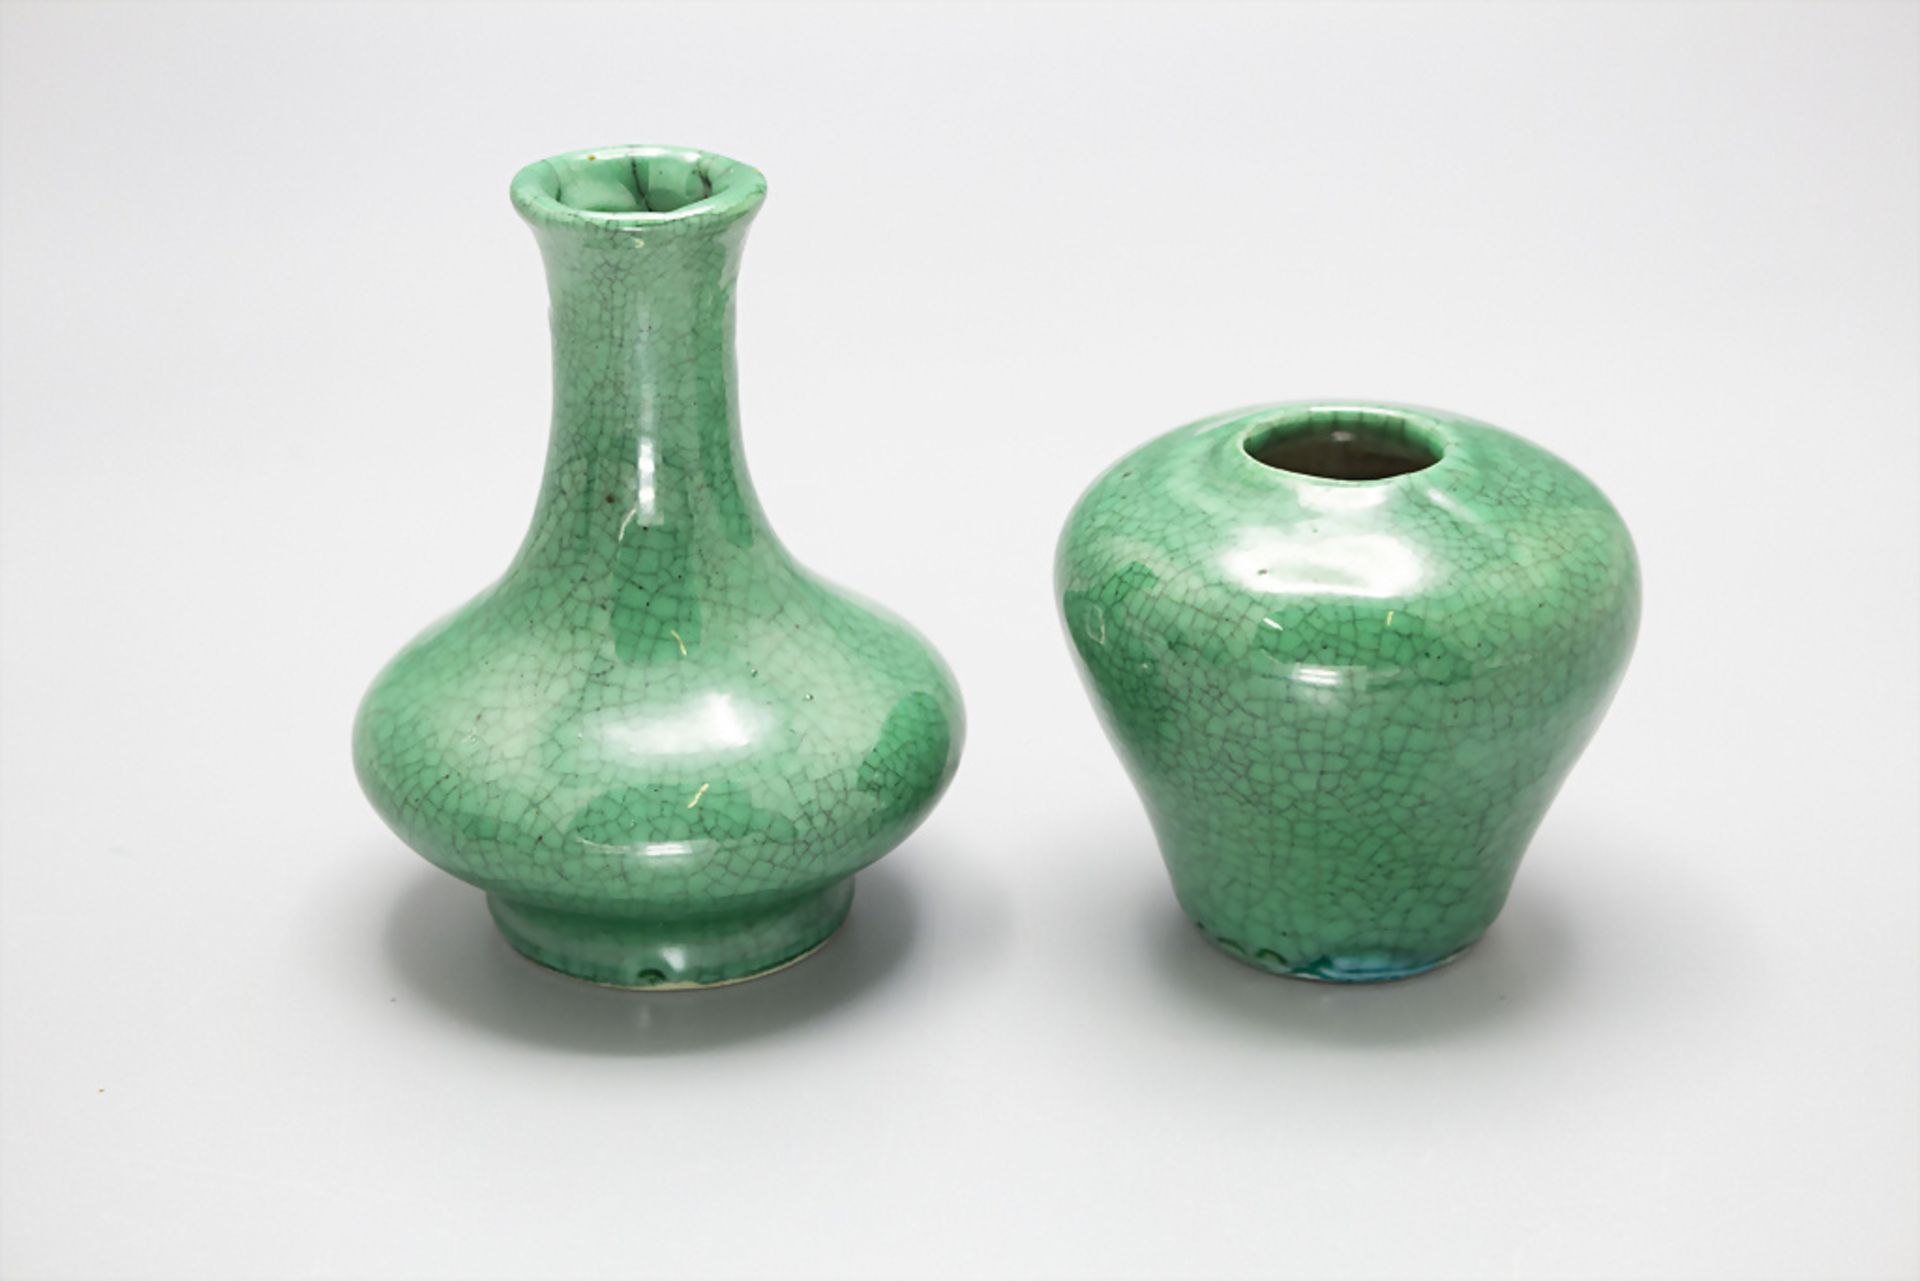 Paar kleine grüne Vasen / A pair of two small green vases, China, Qing-Zeit, 19. Jh.